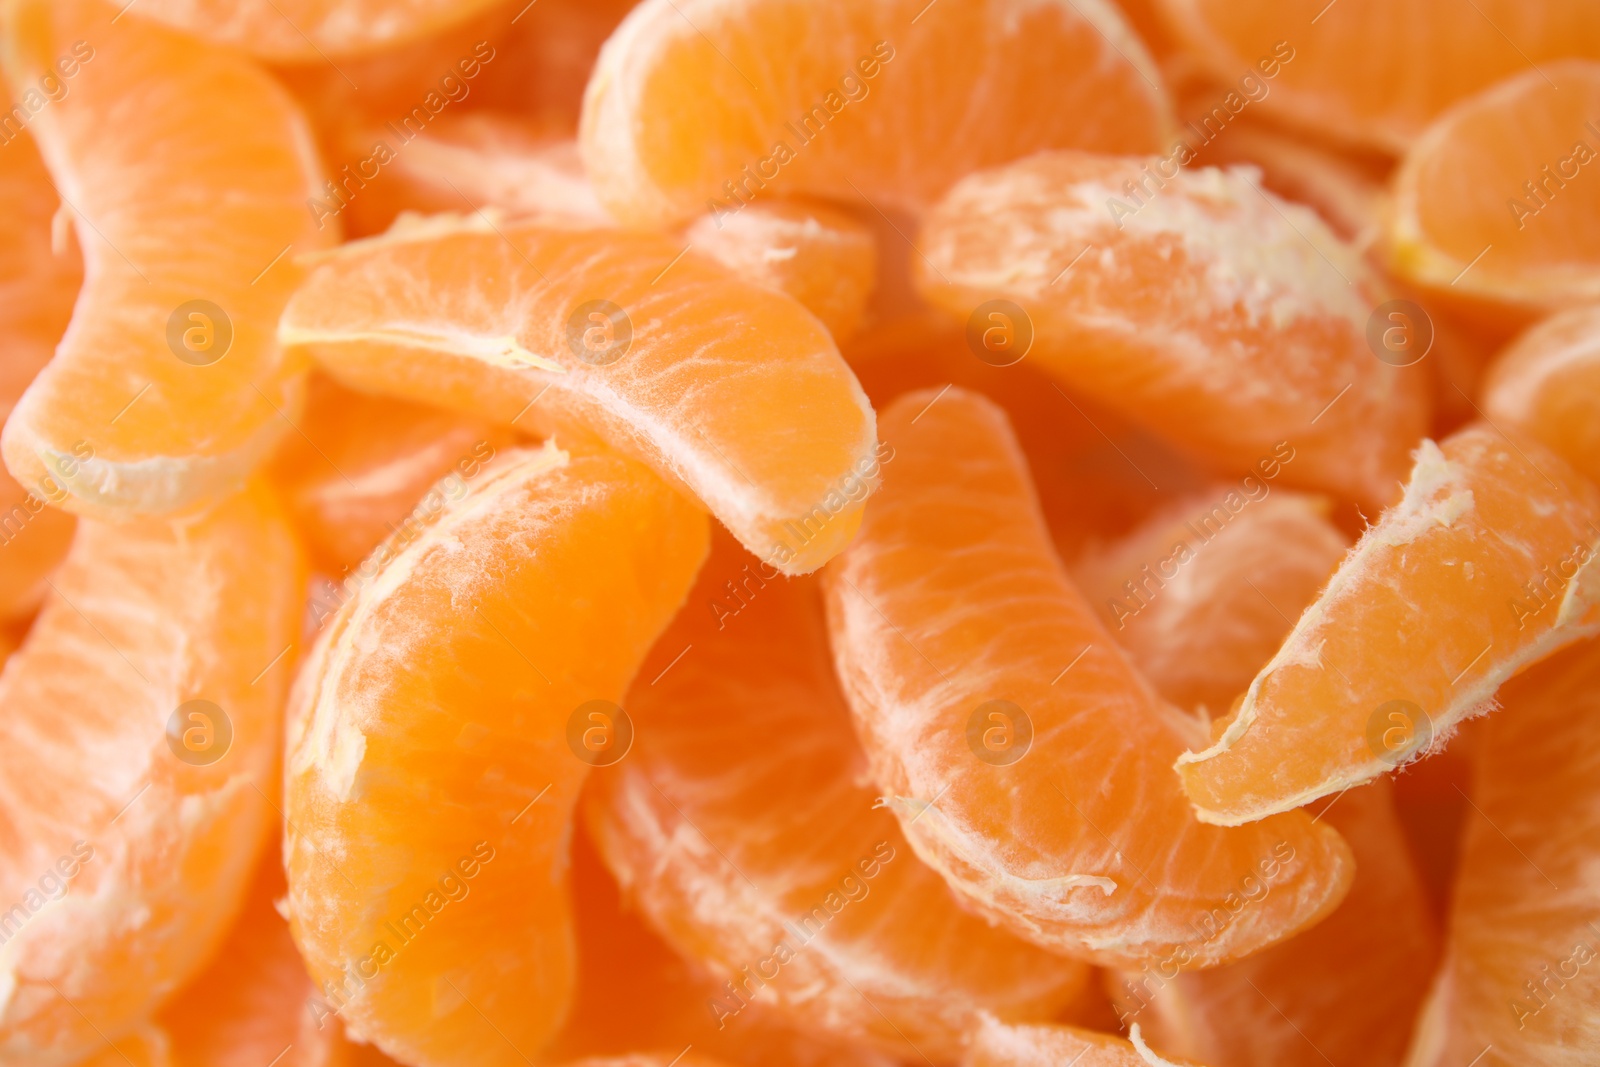 Photo of Segments of tasty tangerines as background, closeup